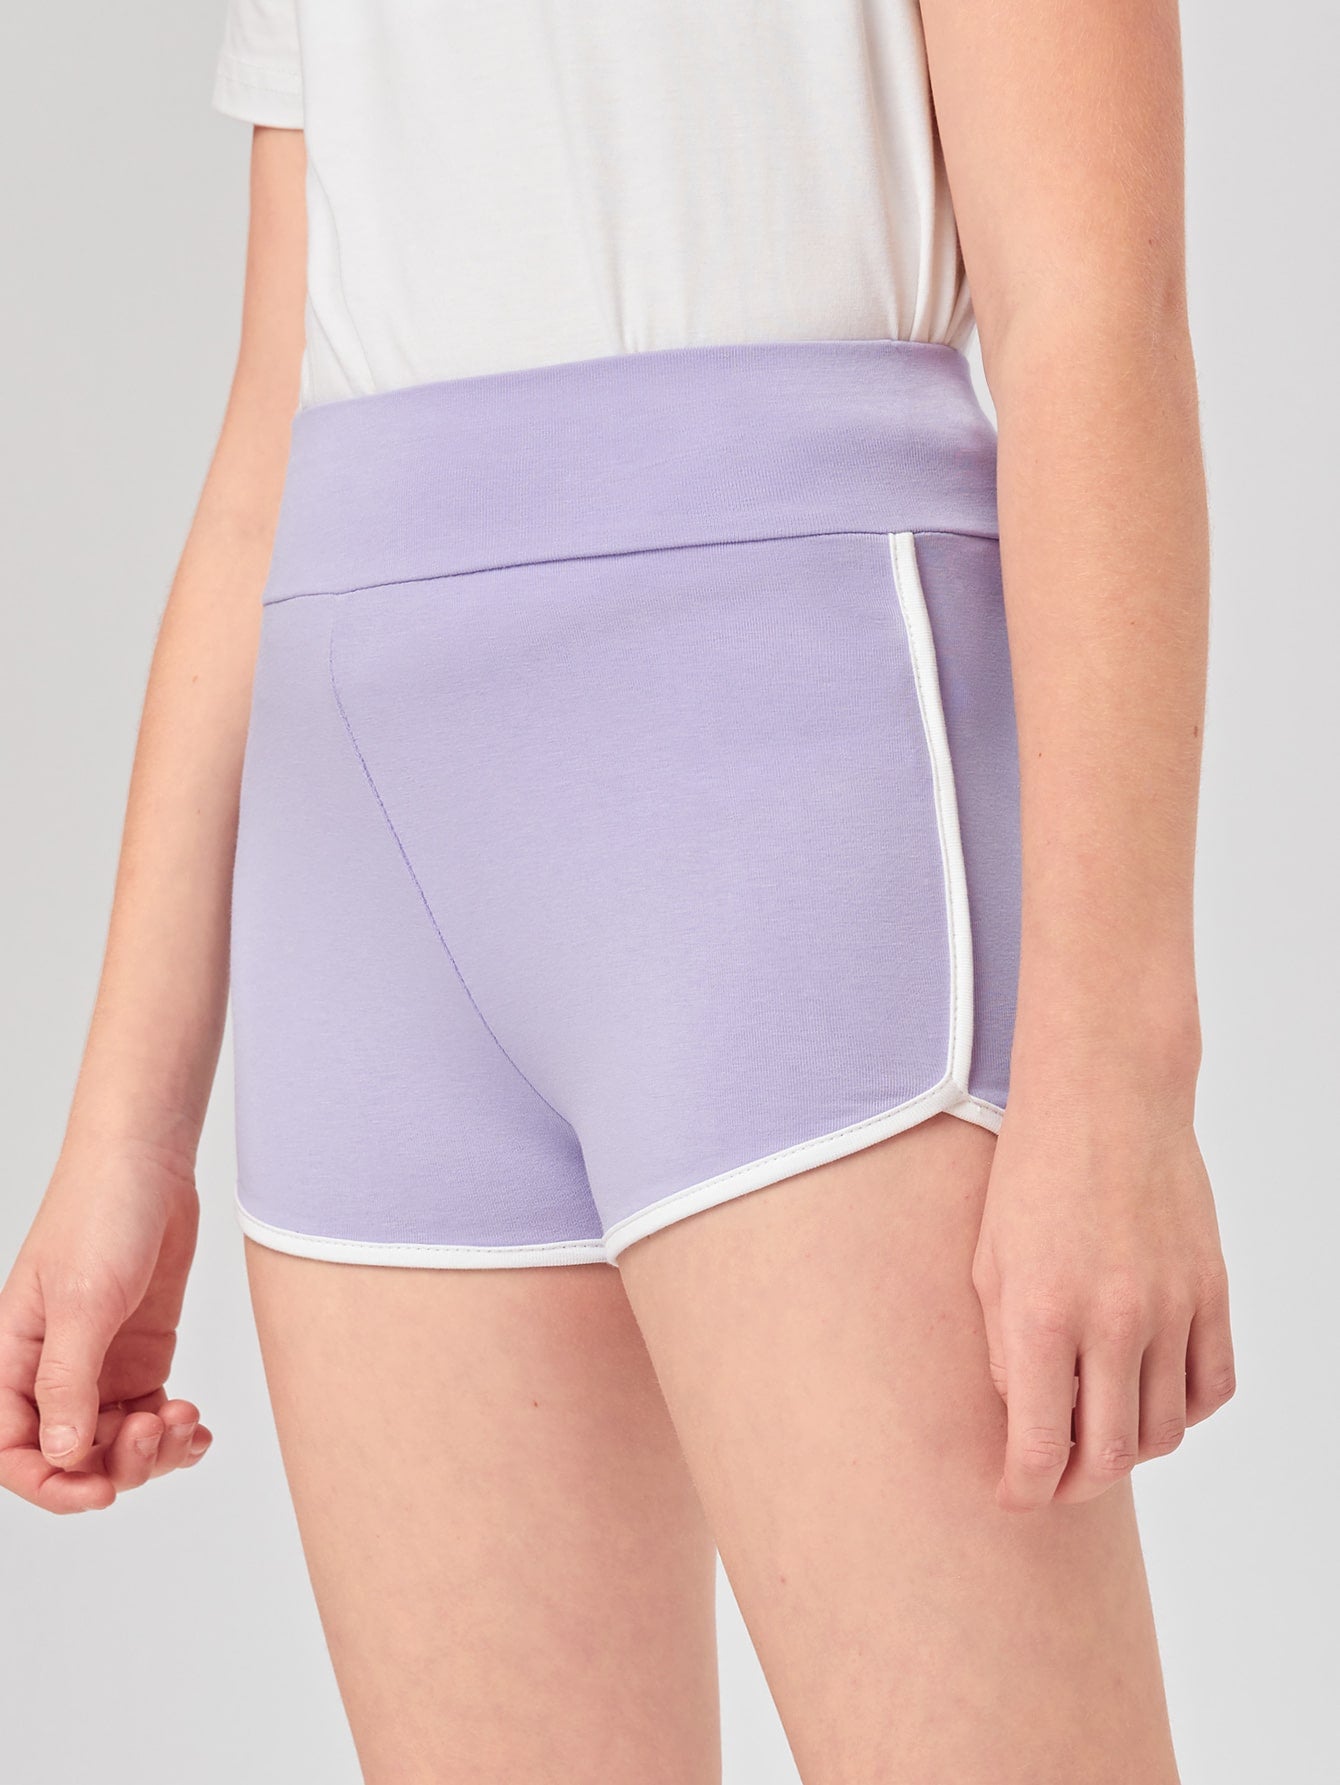 Is That The New Wide Waistband Dolphin Shorts ??